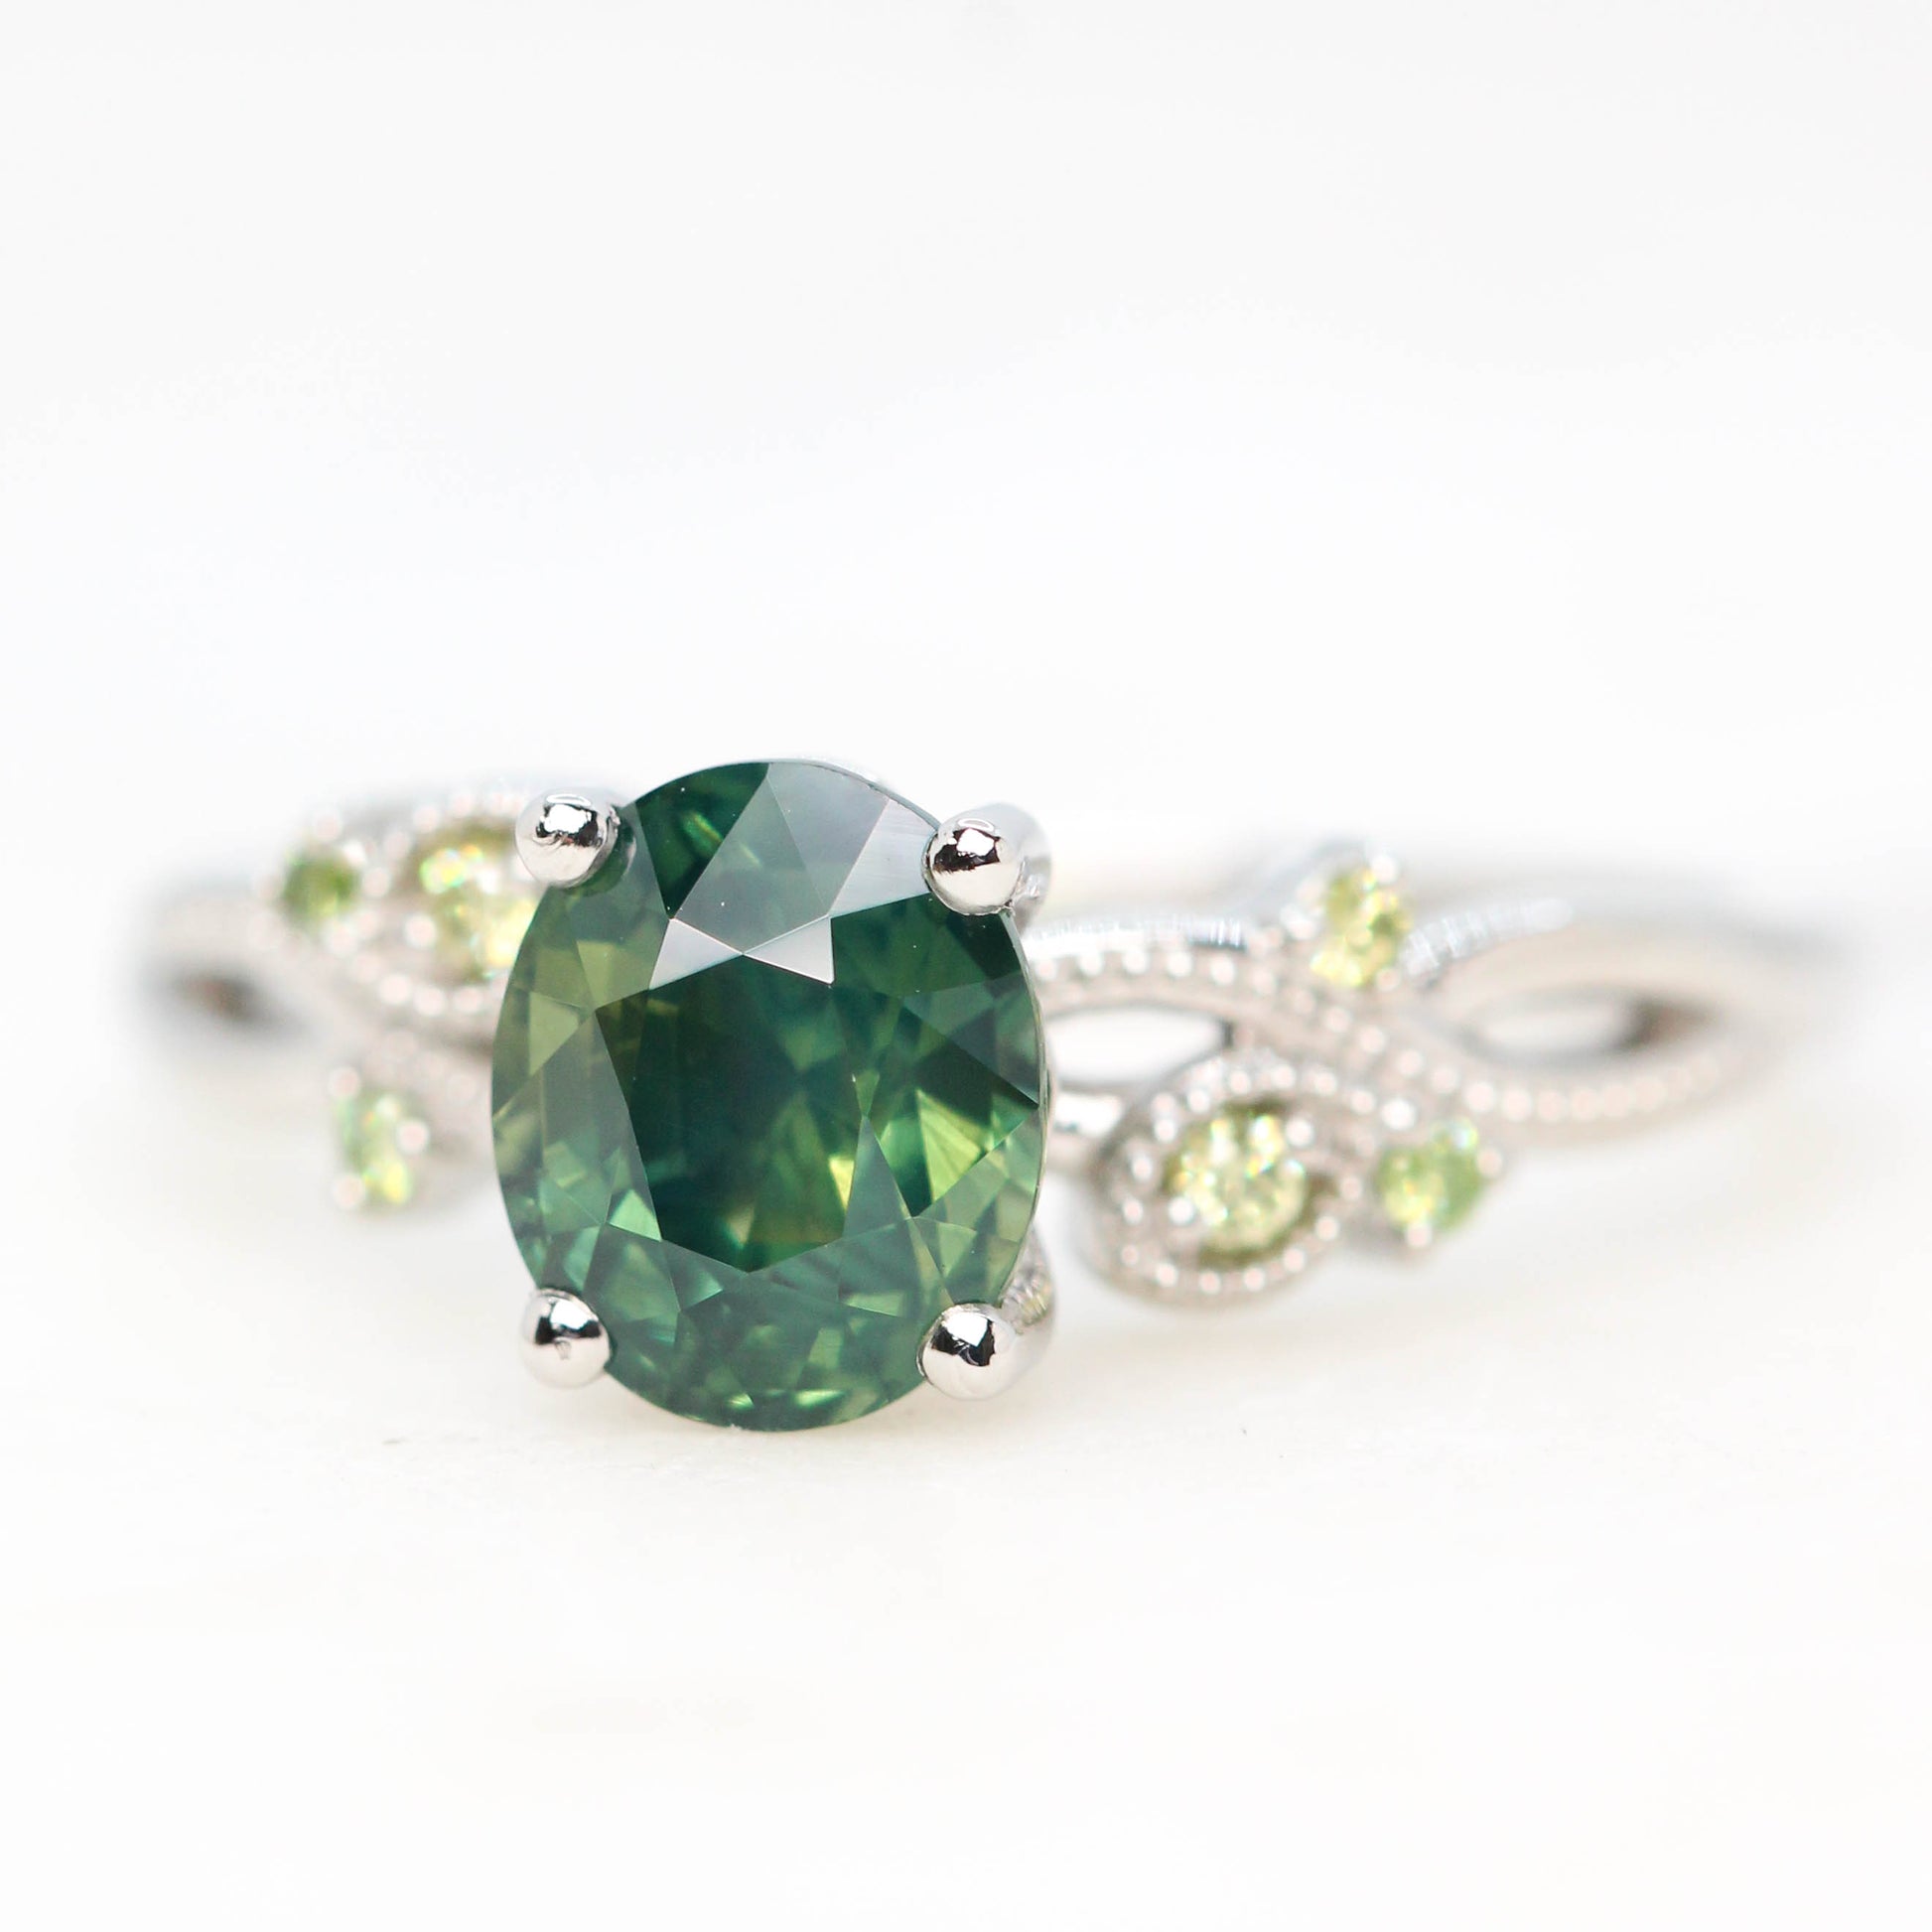 Jasmine Ring with a 2.18 Carat Oval Green Sapphire and Light Green Diamond Accents in Platinum - Ready to Size and Ship - Midwinter Co. Alternative Bridal Rings and Modern Fine Jewelry